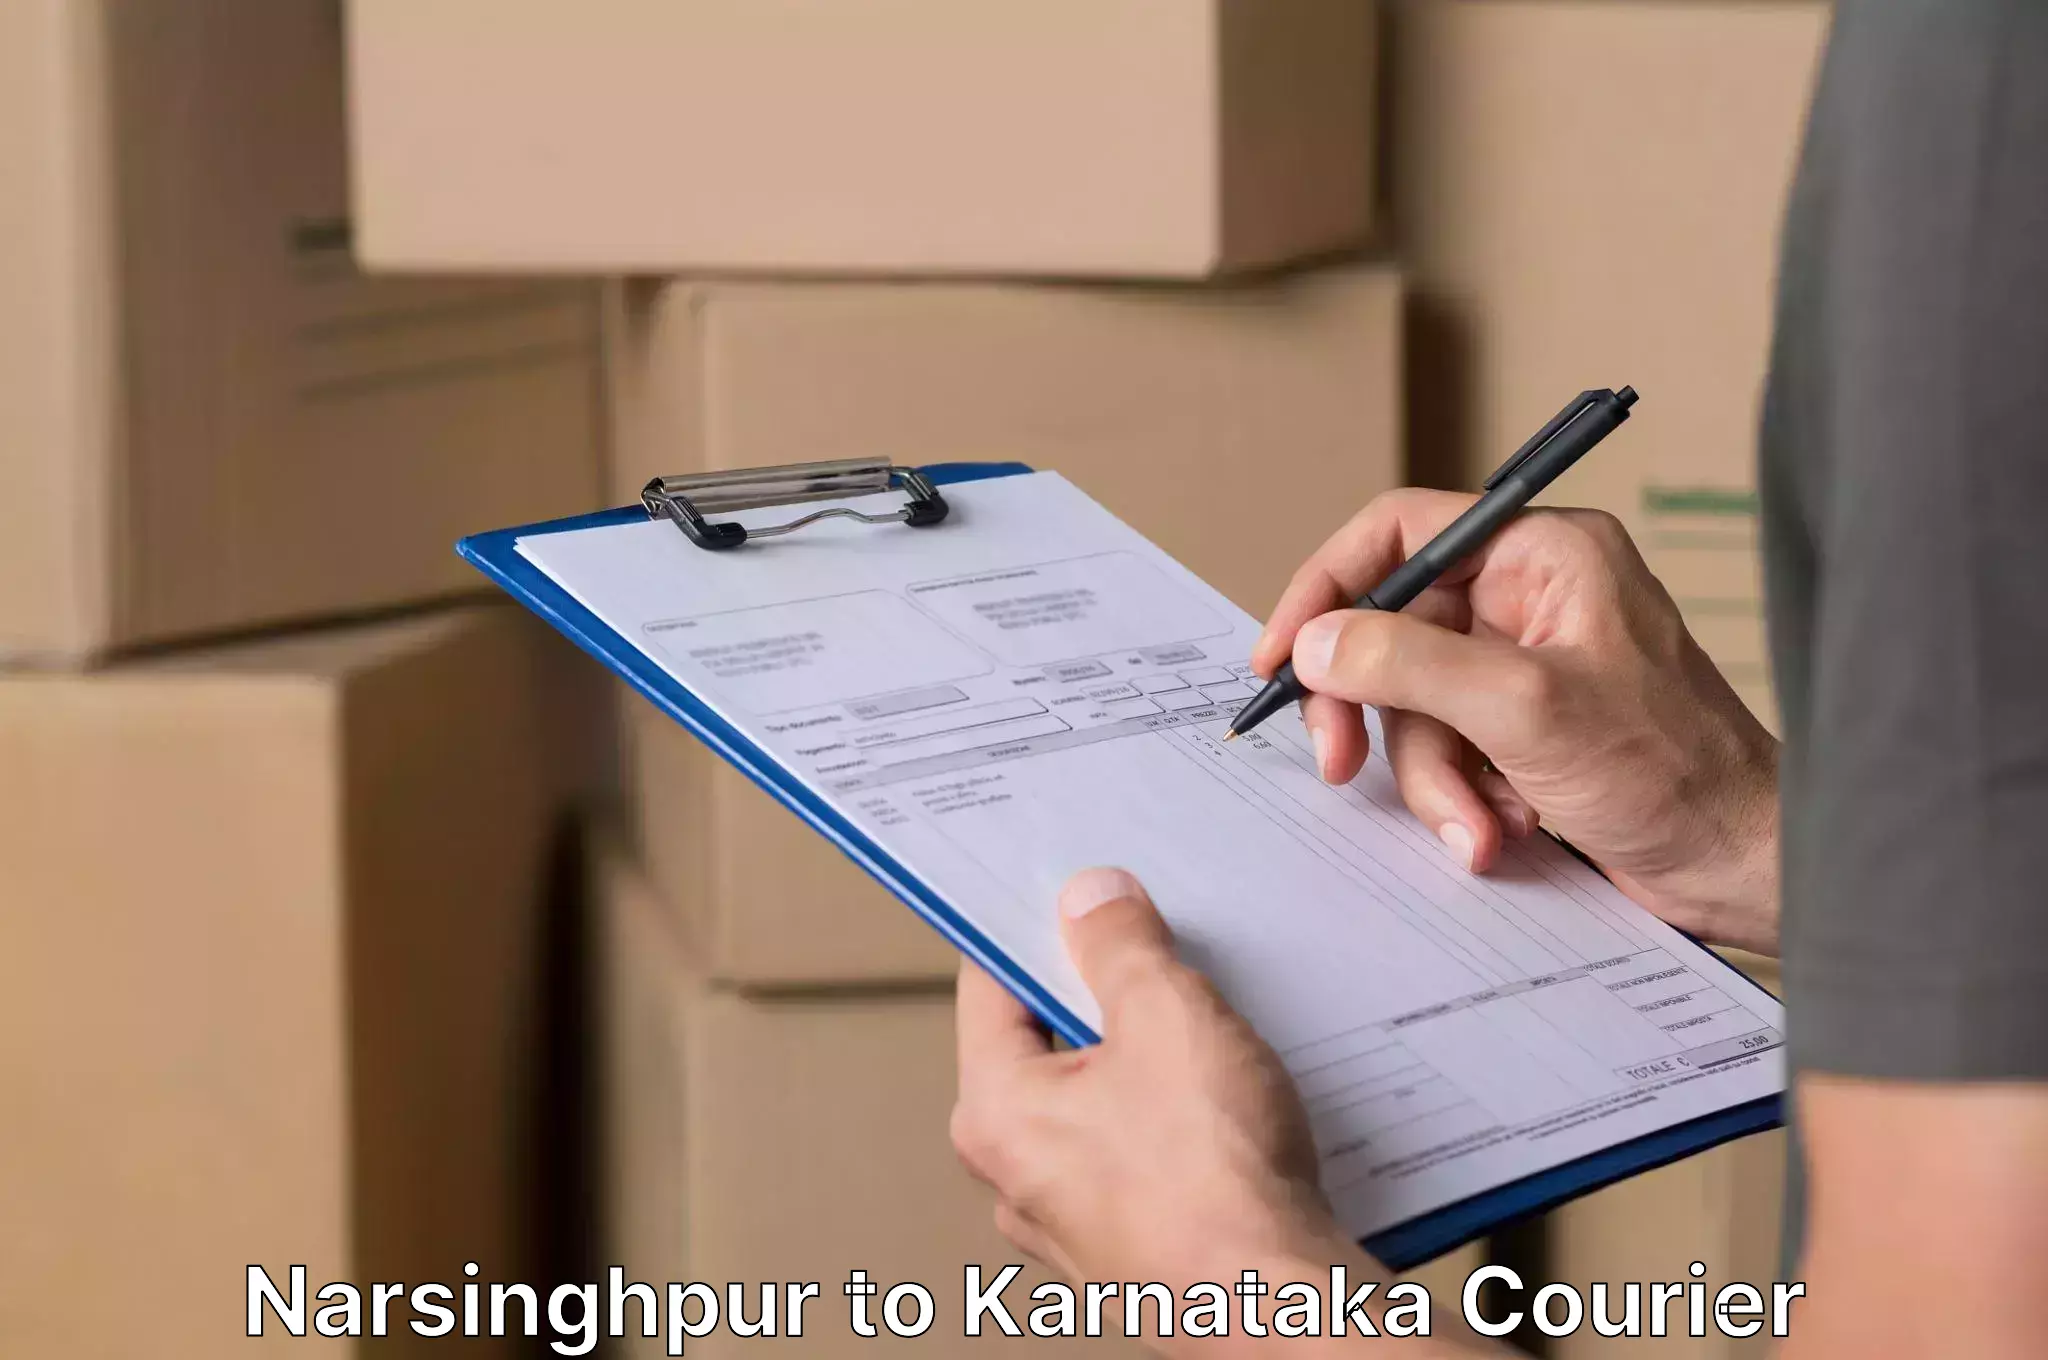 Full-service movers Narsinghpur to Manipal Academy of Higher Education